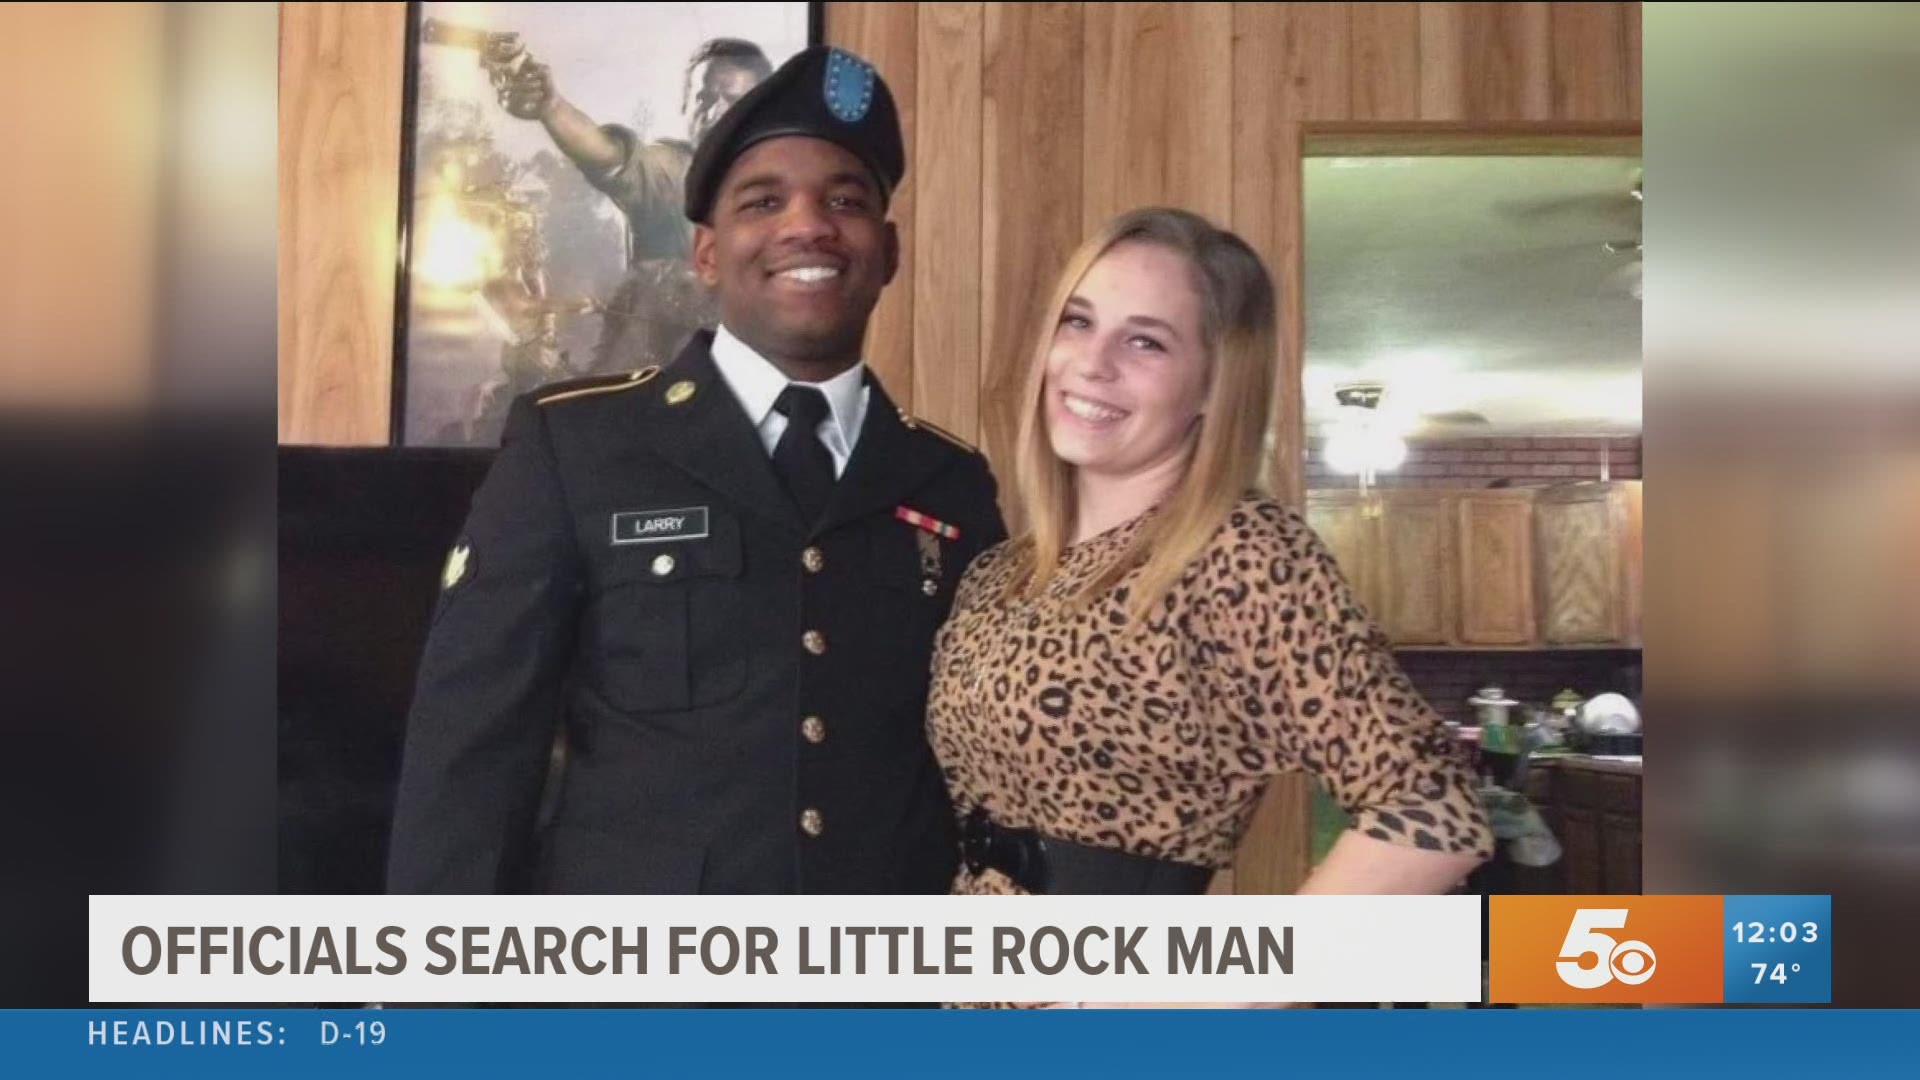 Patrick Larry, who was reported missing over the weekend, reportedly went walking into the woods Saturday night near the Arkansas River and hasn't been seen since.